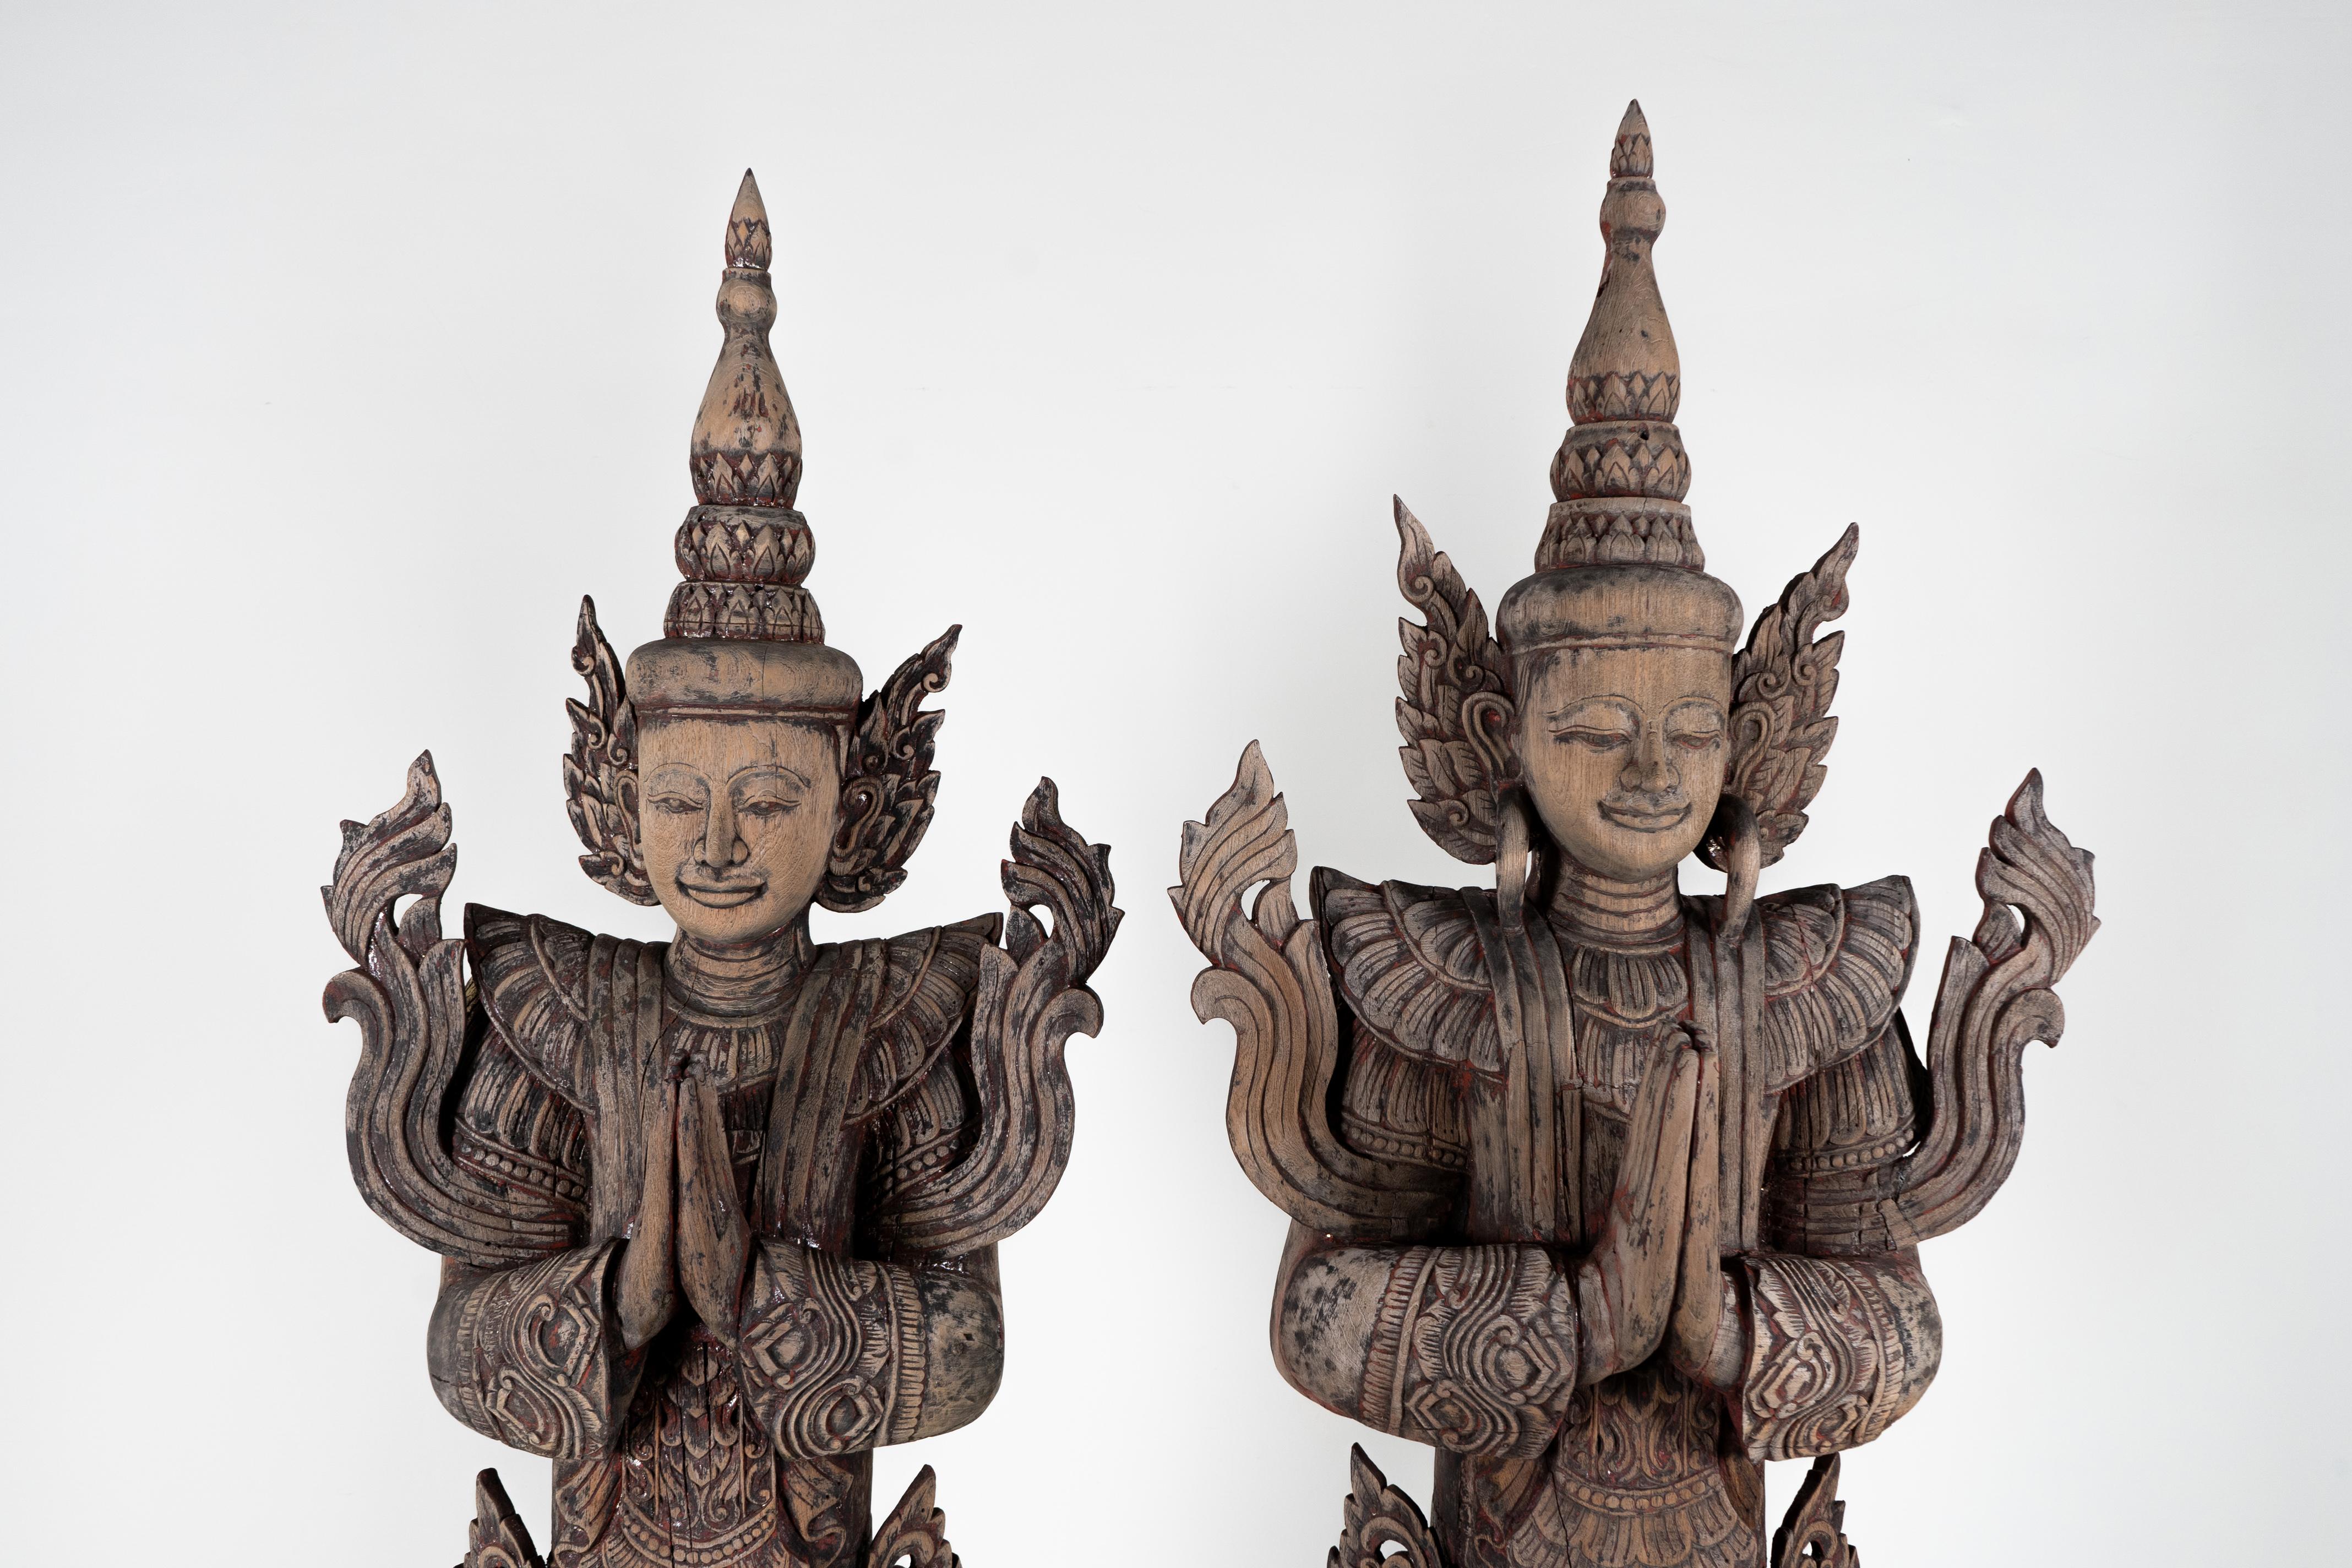 Thai temples often featured various kinds of carved figures including Buddhas and angels. This large set of wooden greeting angels is based on the sculptures that typically flanked altars or entrances. Thai Buddhists, like members of other faiths,